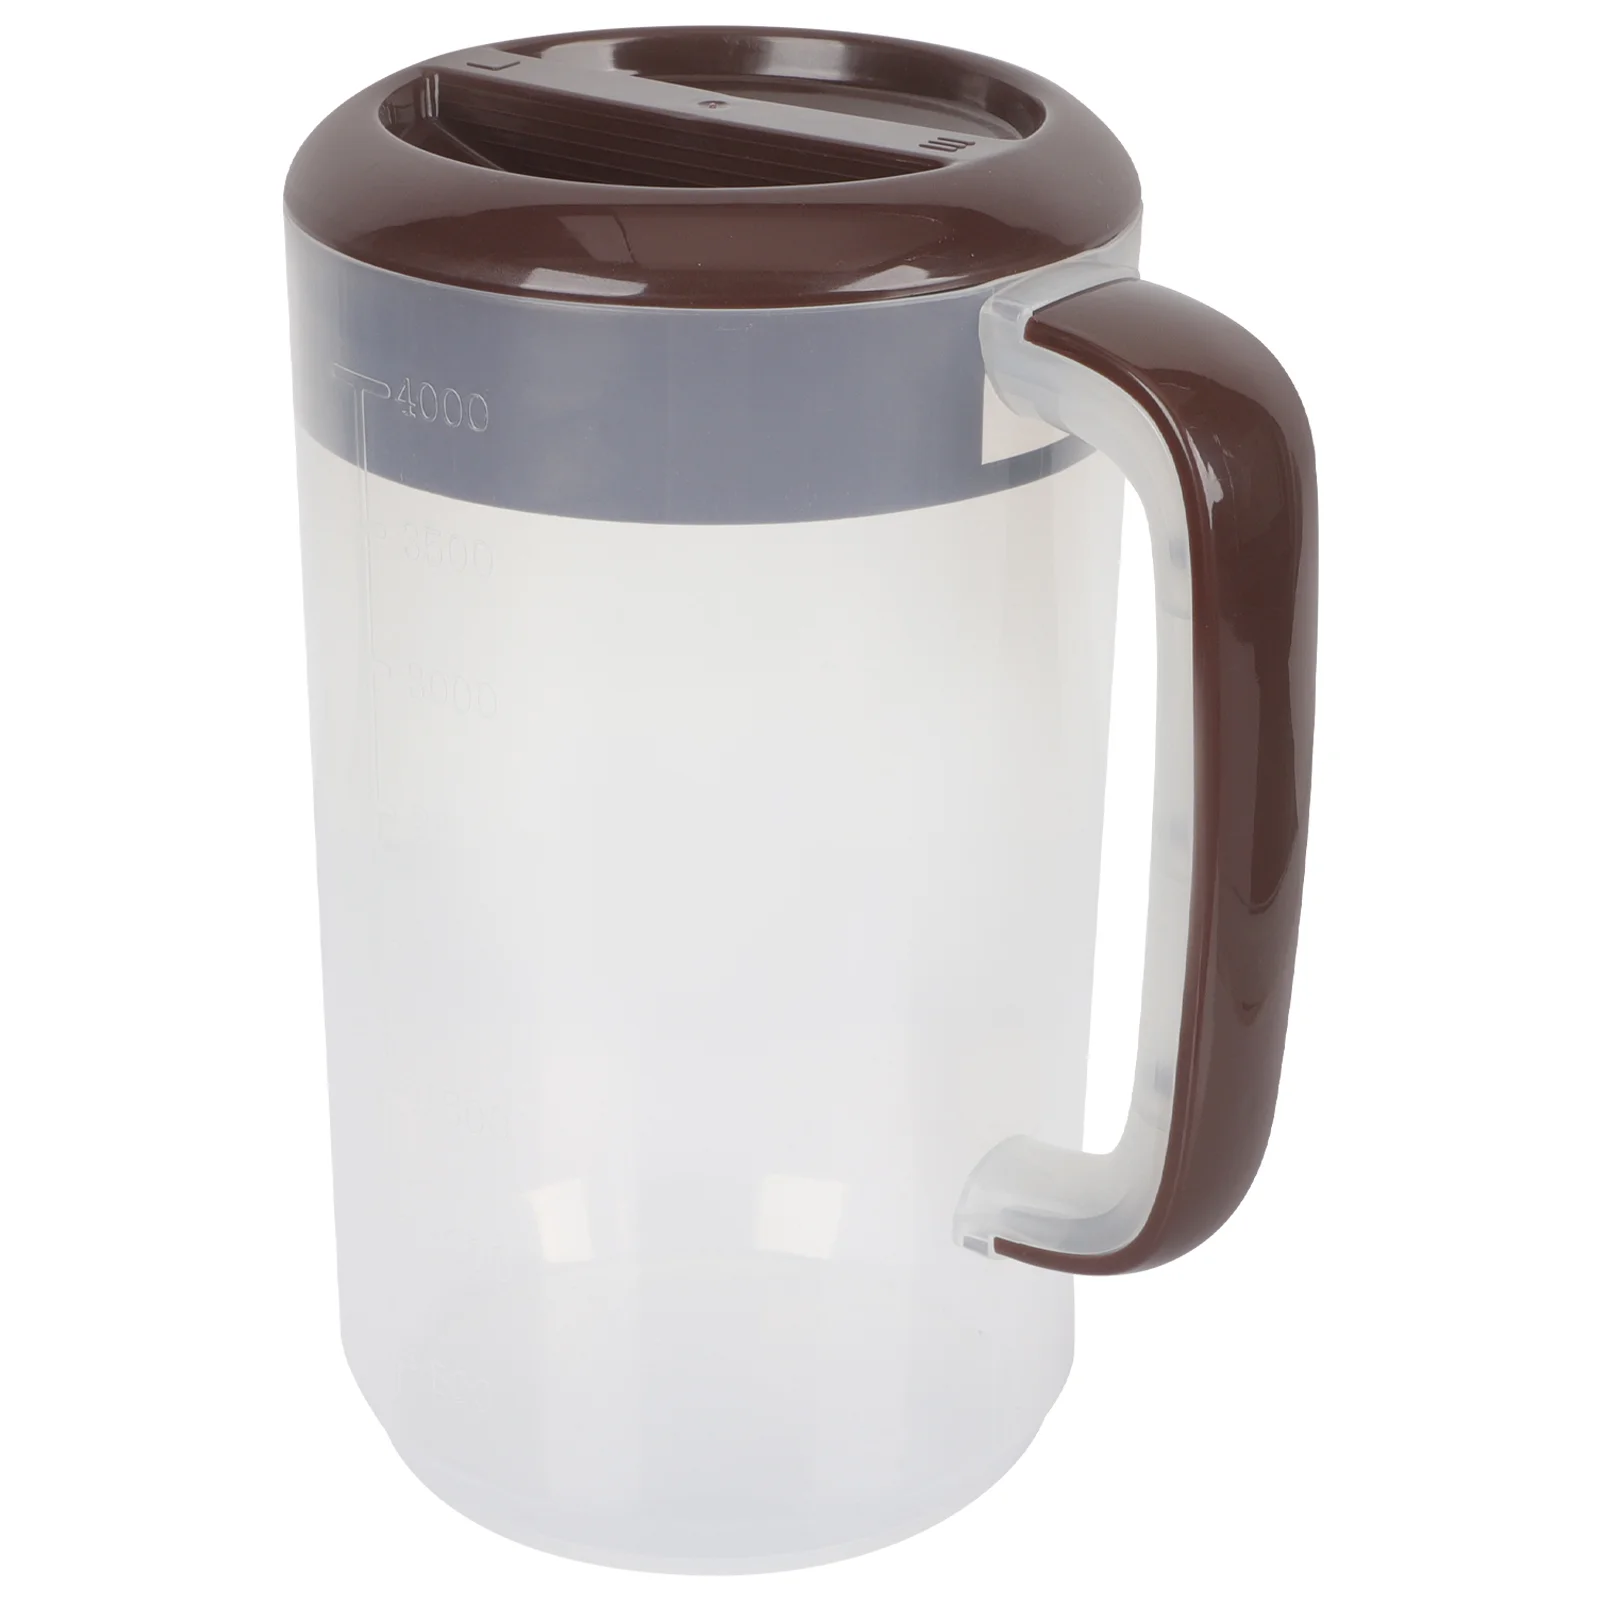 

Large-capacity Clear Portable Lasting Widely- Plastic Water Pitcher for Daily Use